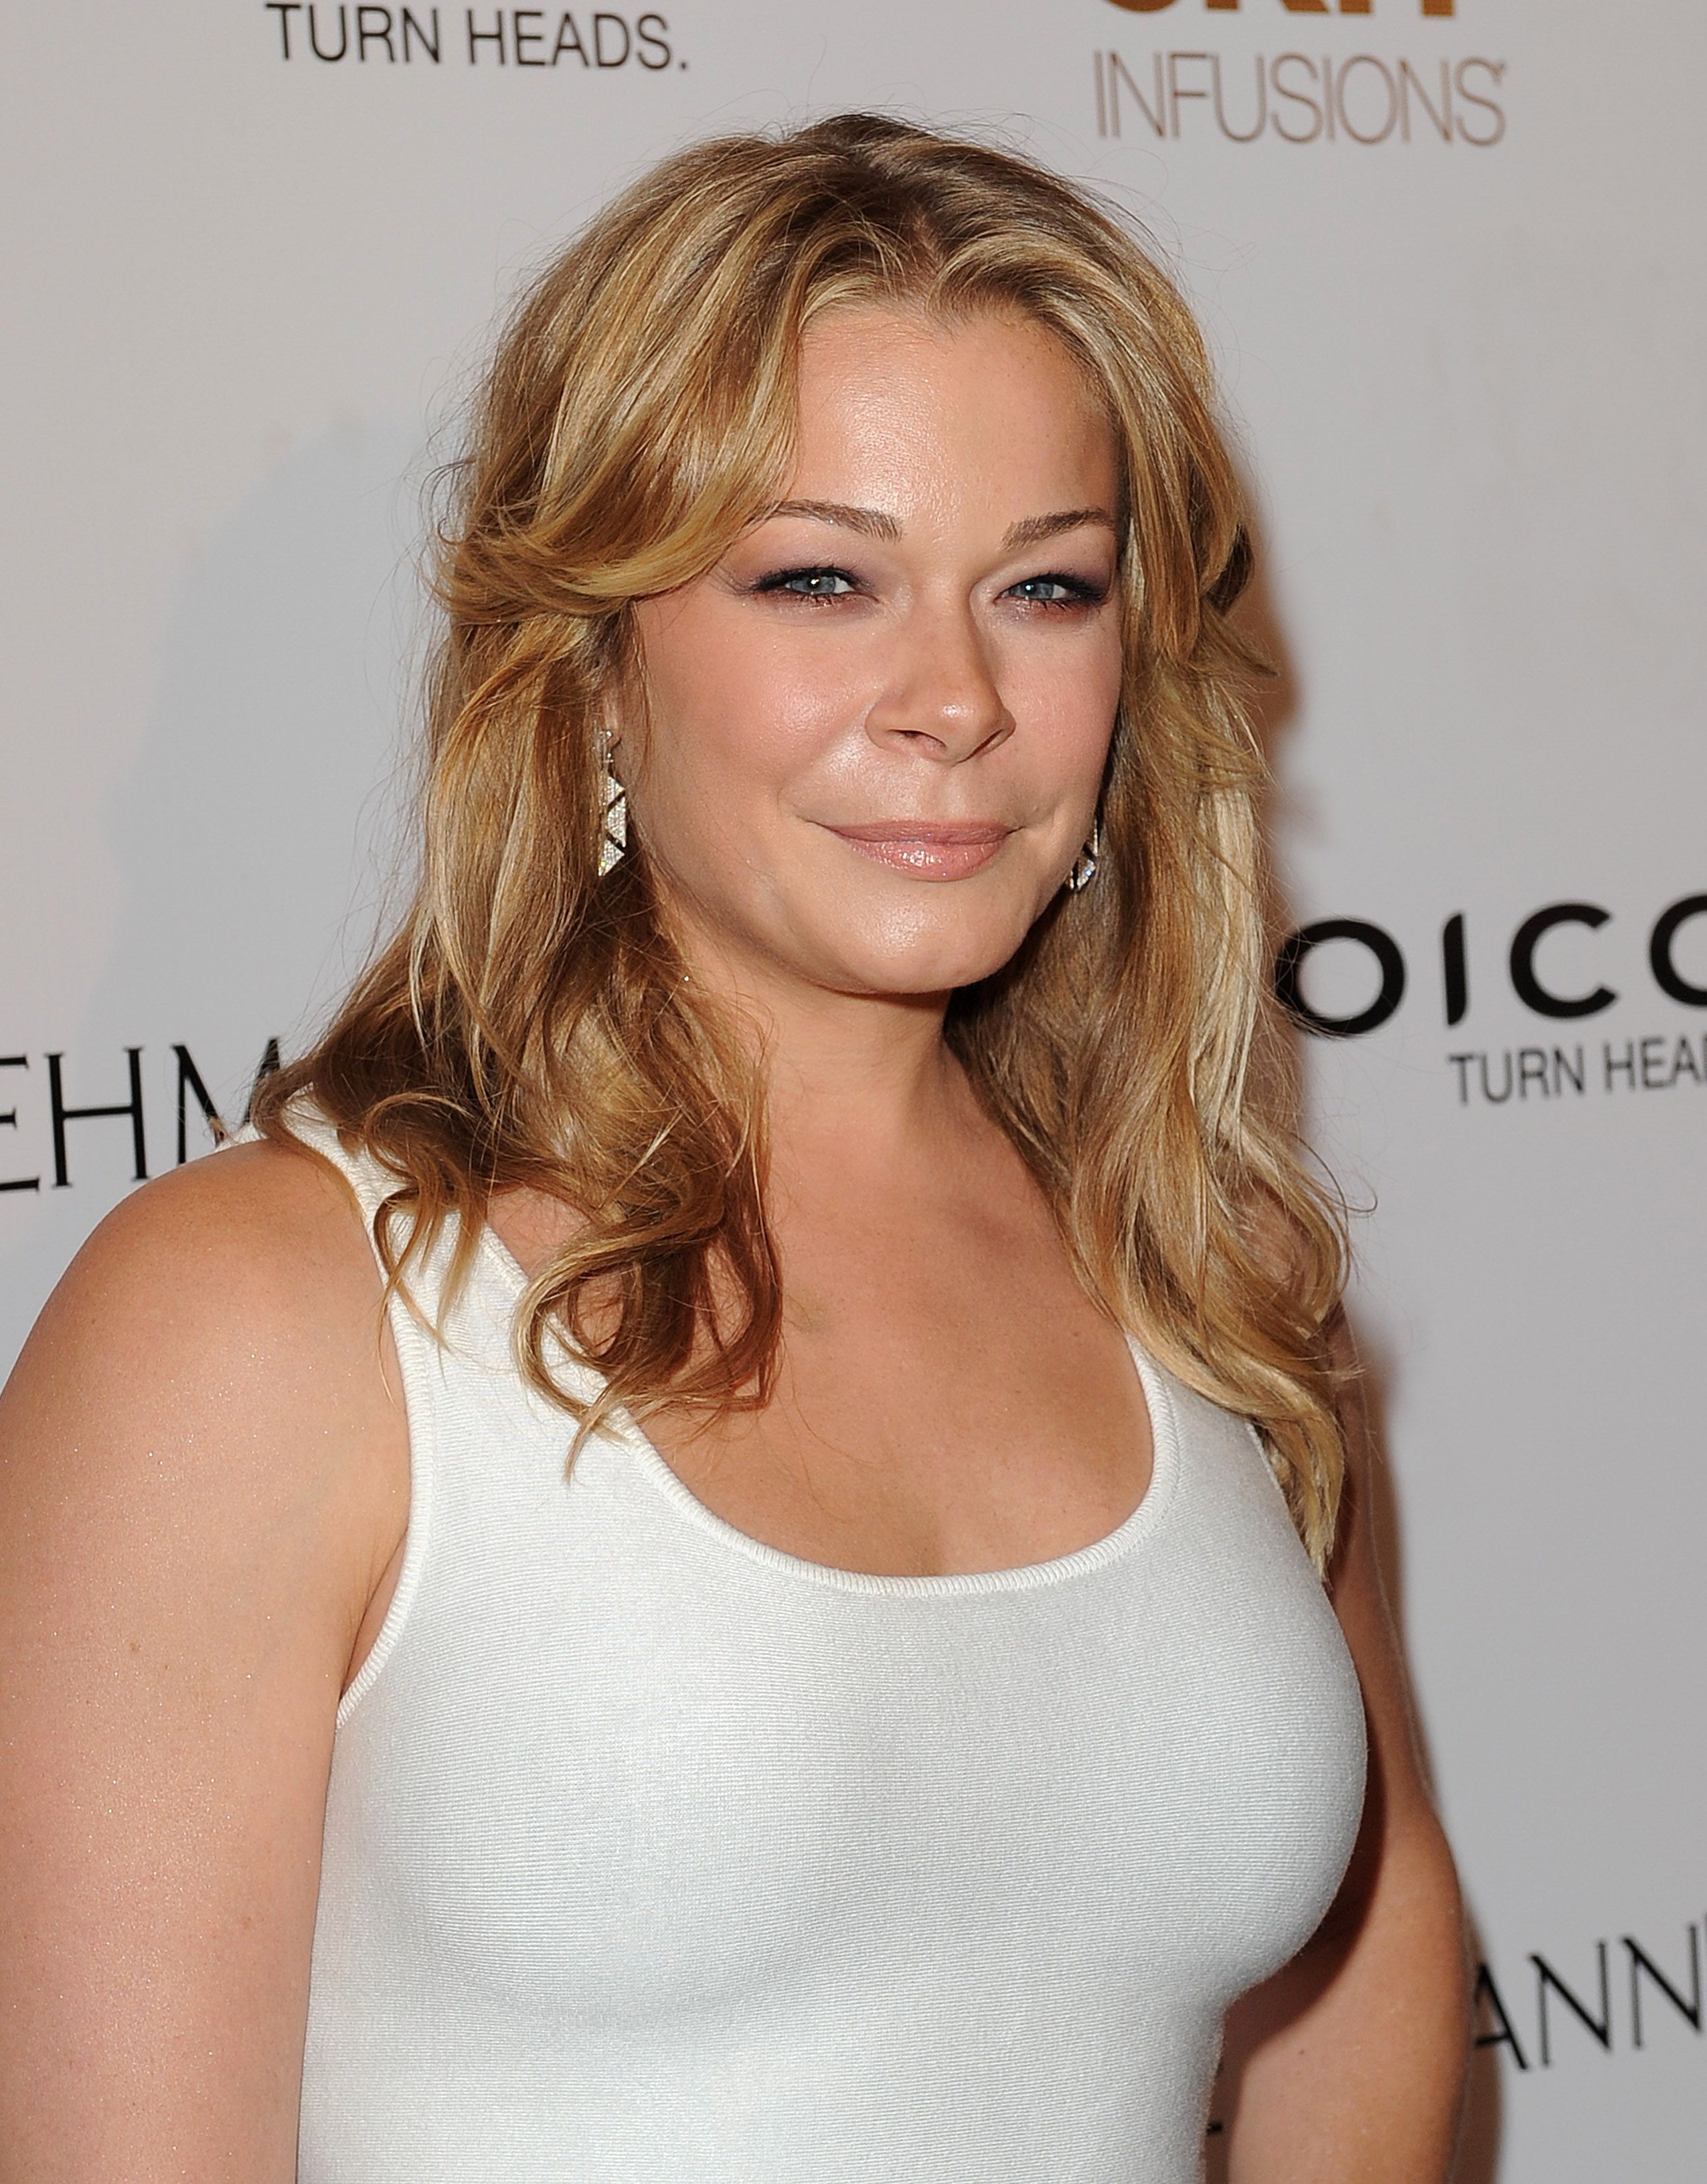 <p>These days, <a href="https://www.wonderwall.com/celebrity/profiles/overview/leann-rimes-713.article">LeAnn Rimes</a> sports a much bigger bust -- as evident in this shot from 2013. Back in 2011, a source revealed to Us Weekly that the singer had her breasts augmented: "She's always, always been insecure about her size," said the source. "She was a small A-cup. She often talked about wanting to get implants. She'd say, 'I just want a little bit so they're proportionate to my body.'"</p>